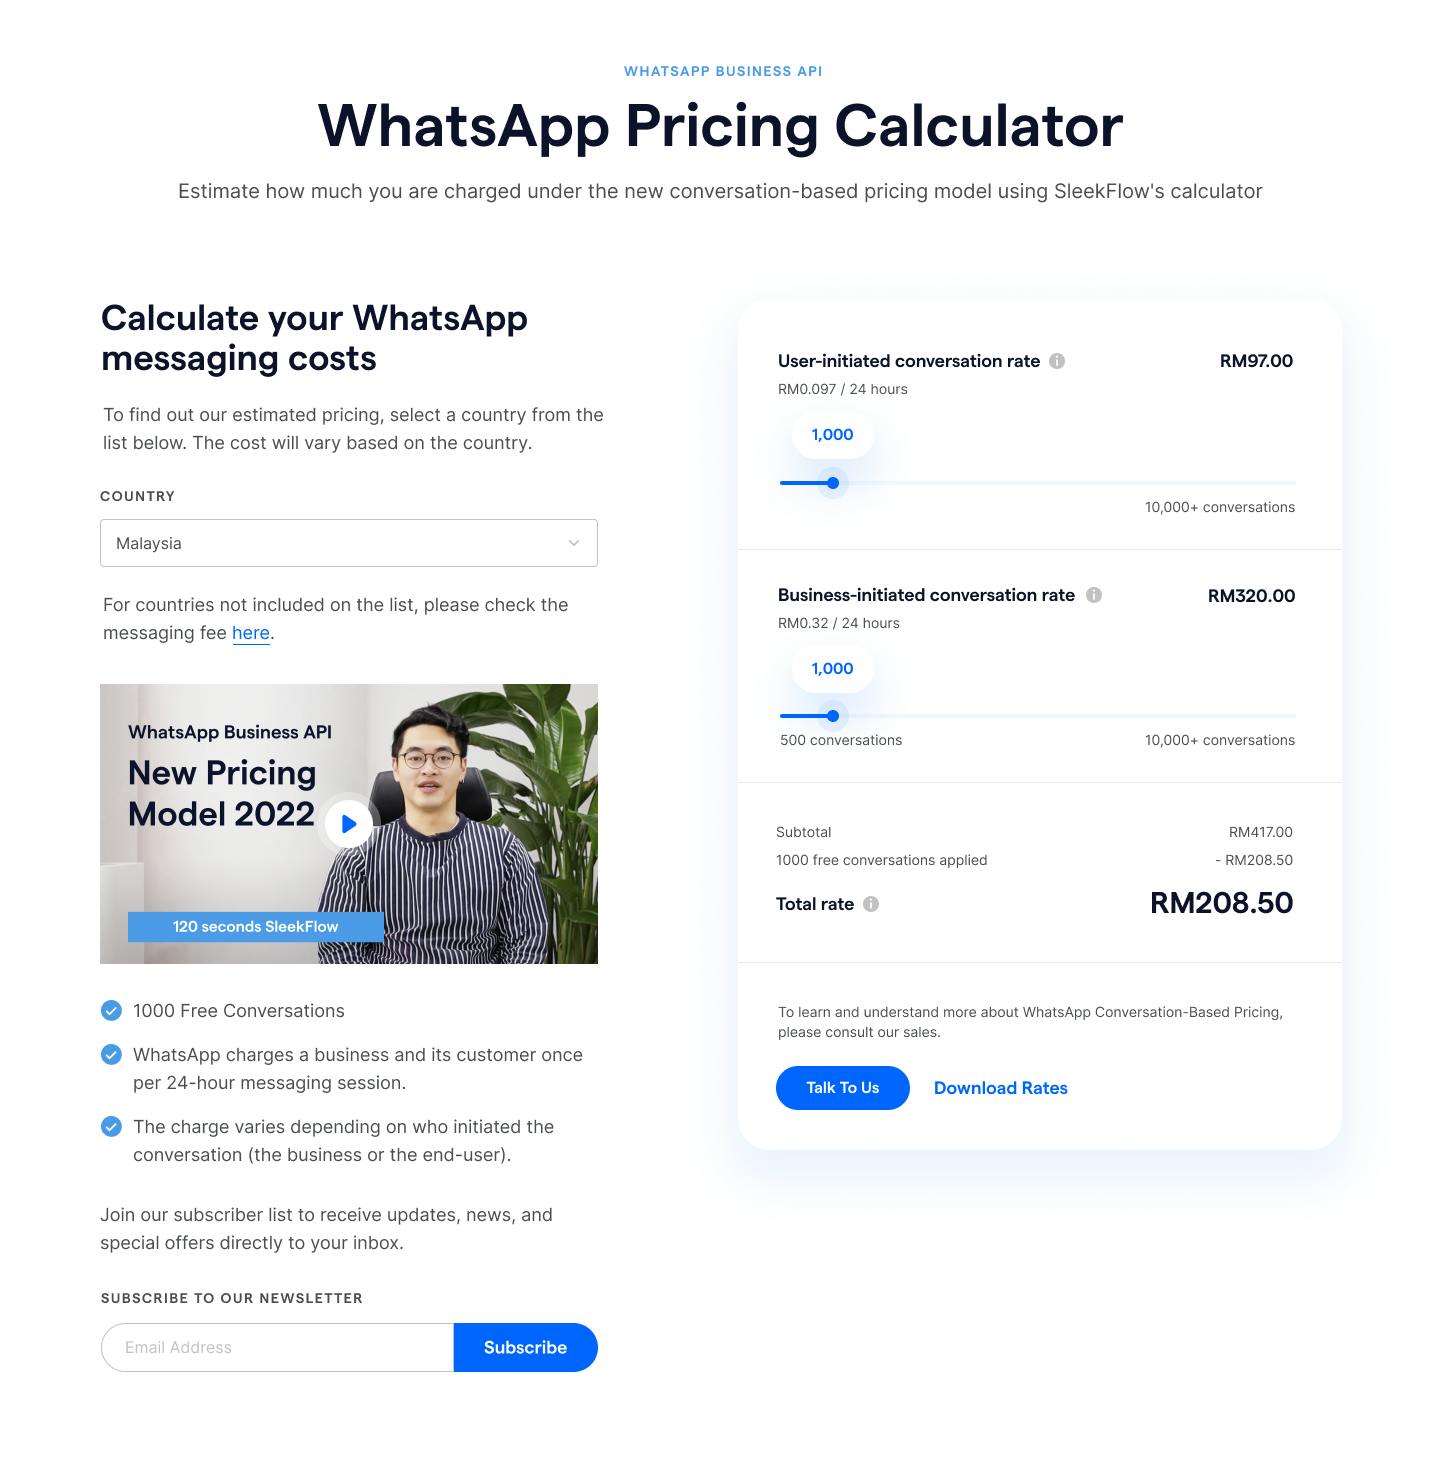 WhatsApp Business API pricing in MYR